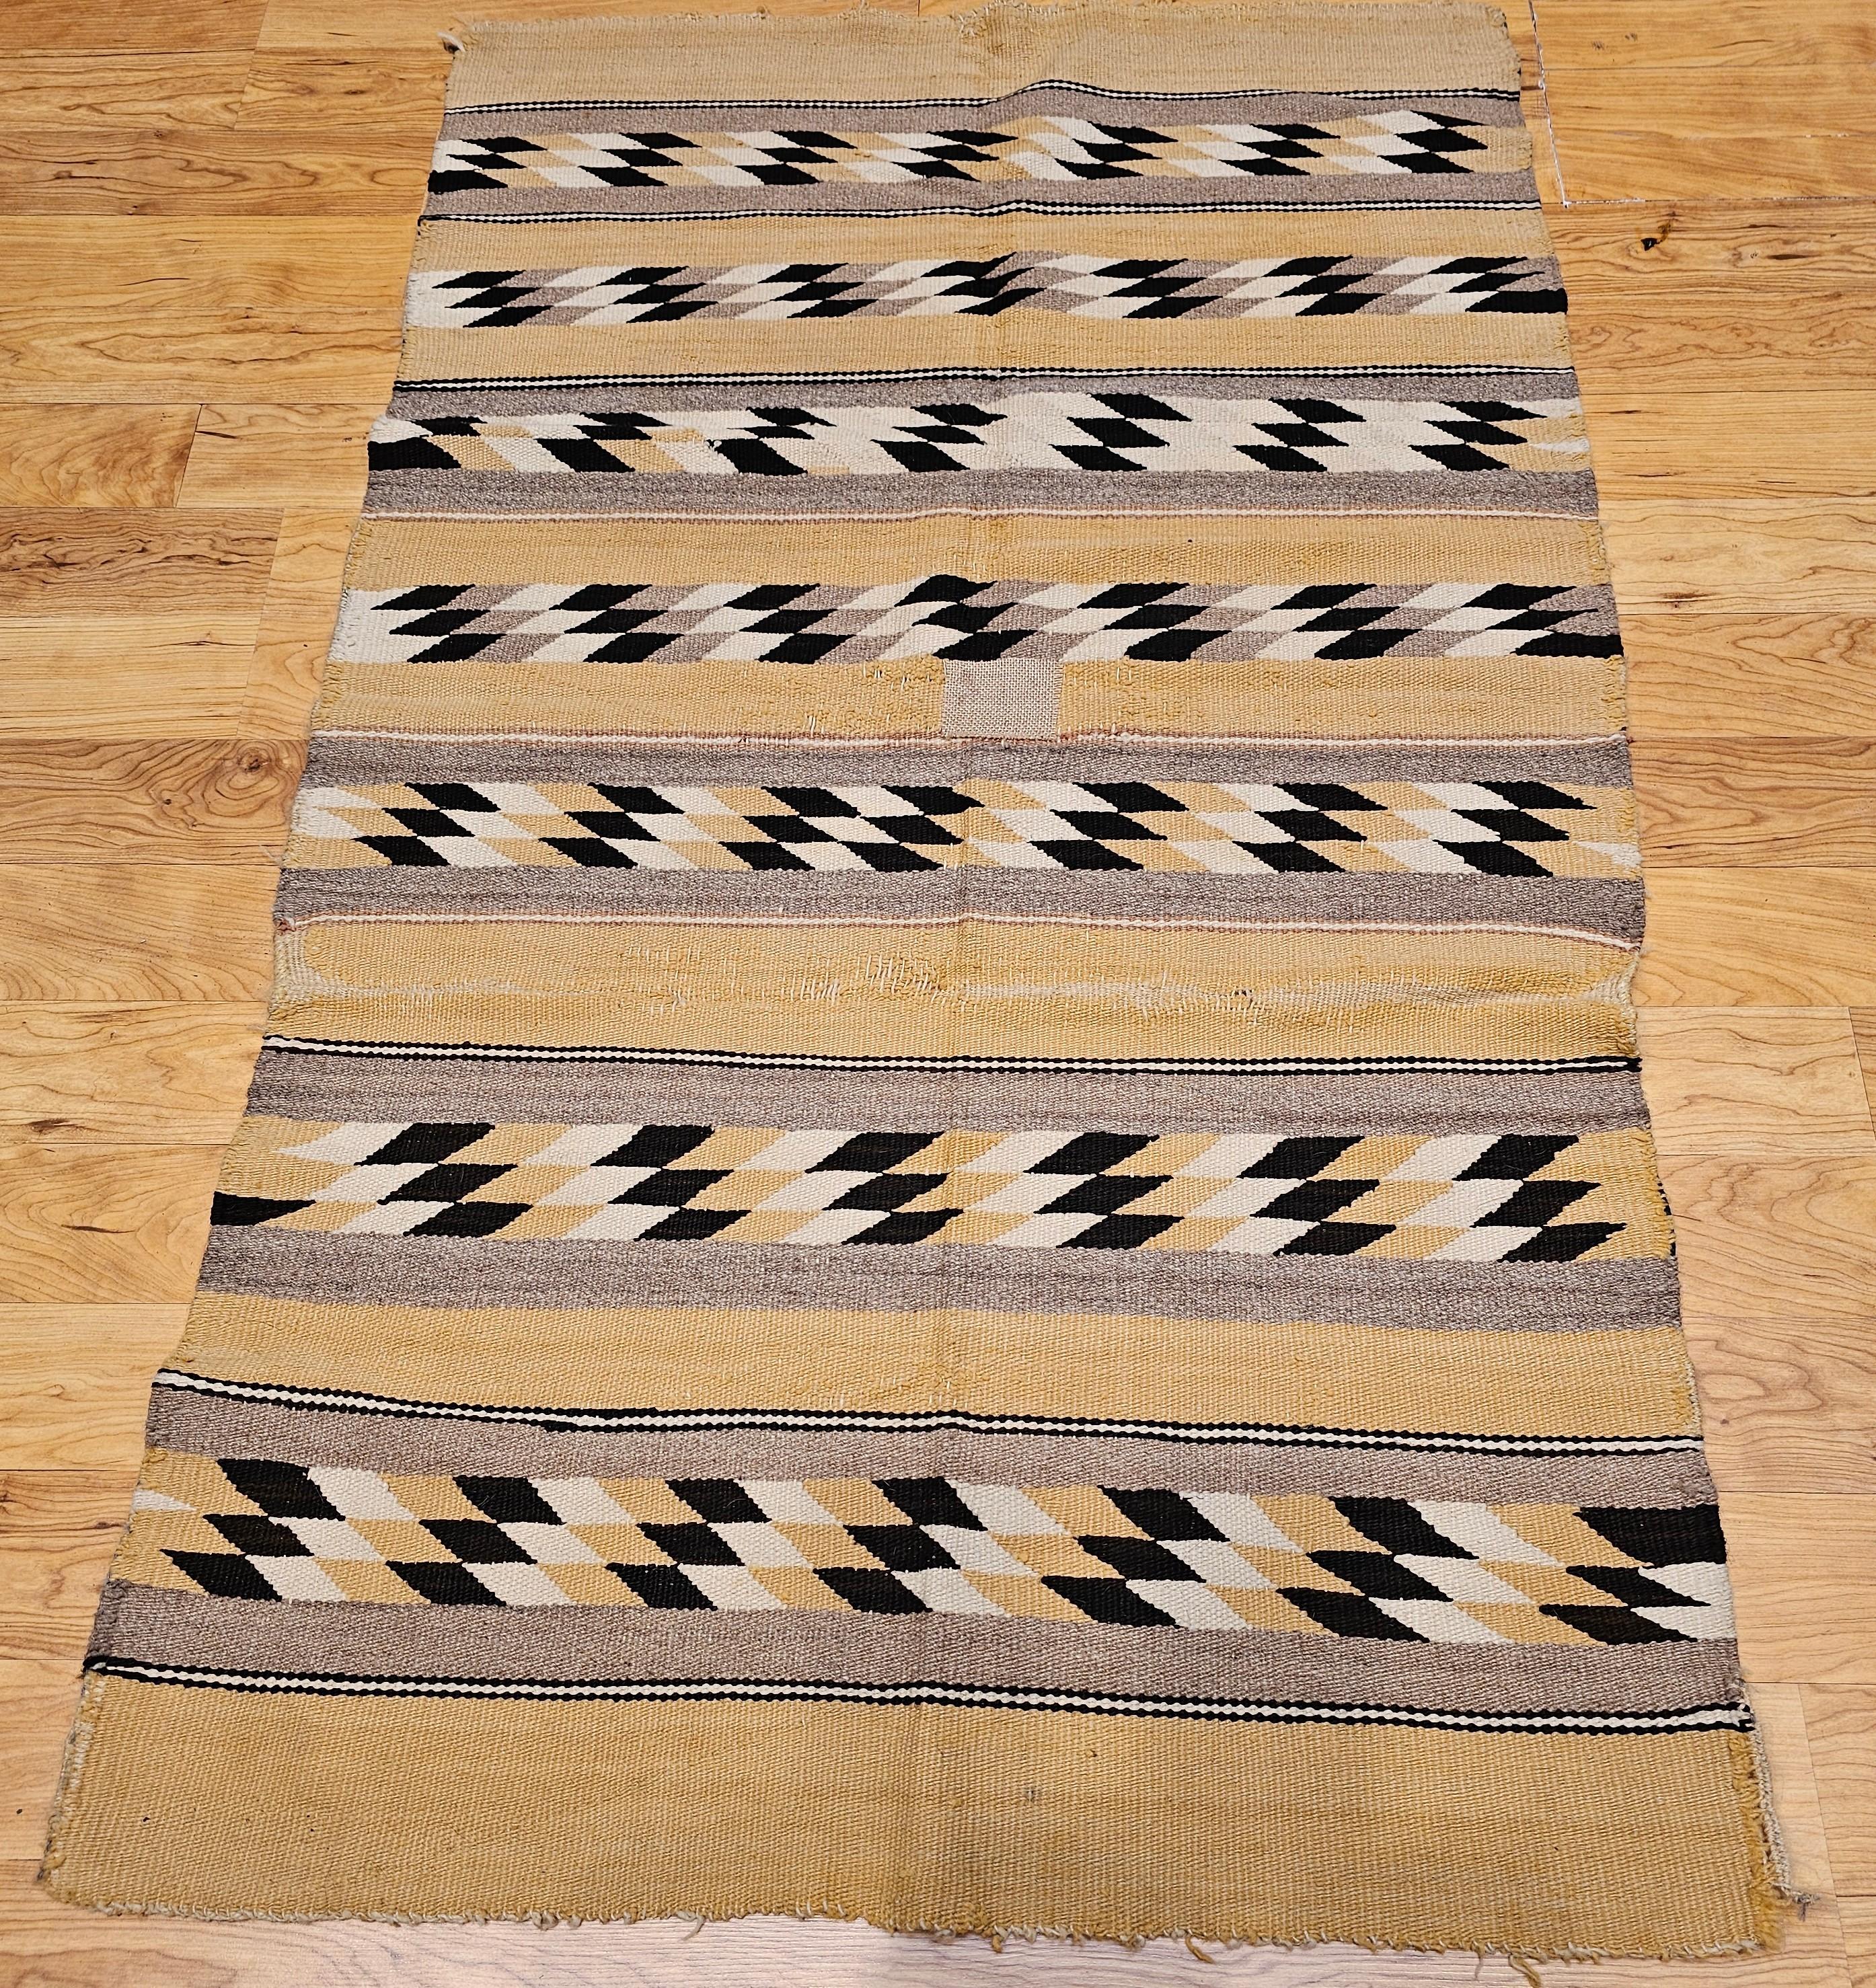 Vintage Native American Navajo Rug in a Chinle revival pattern in earth tone colors including cornmeal, brown, black, ivory, and gray.  The vintage Navajo rug is woven of native hand-spun wool in a Chinle revival pattern. This style of Navajo